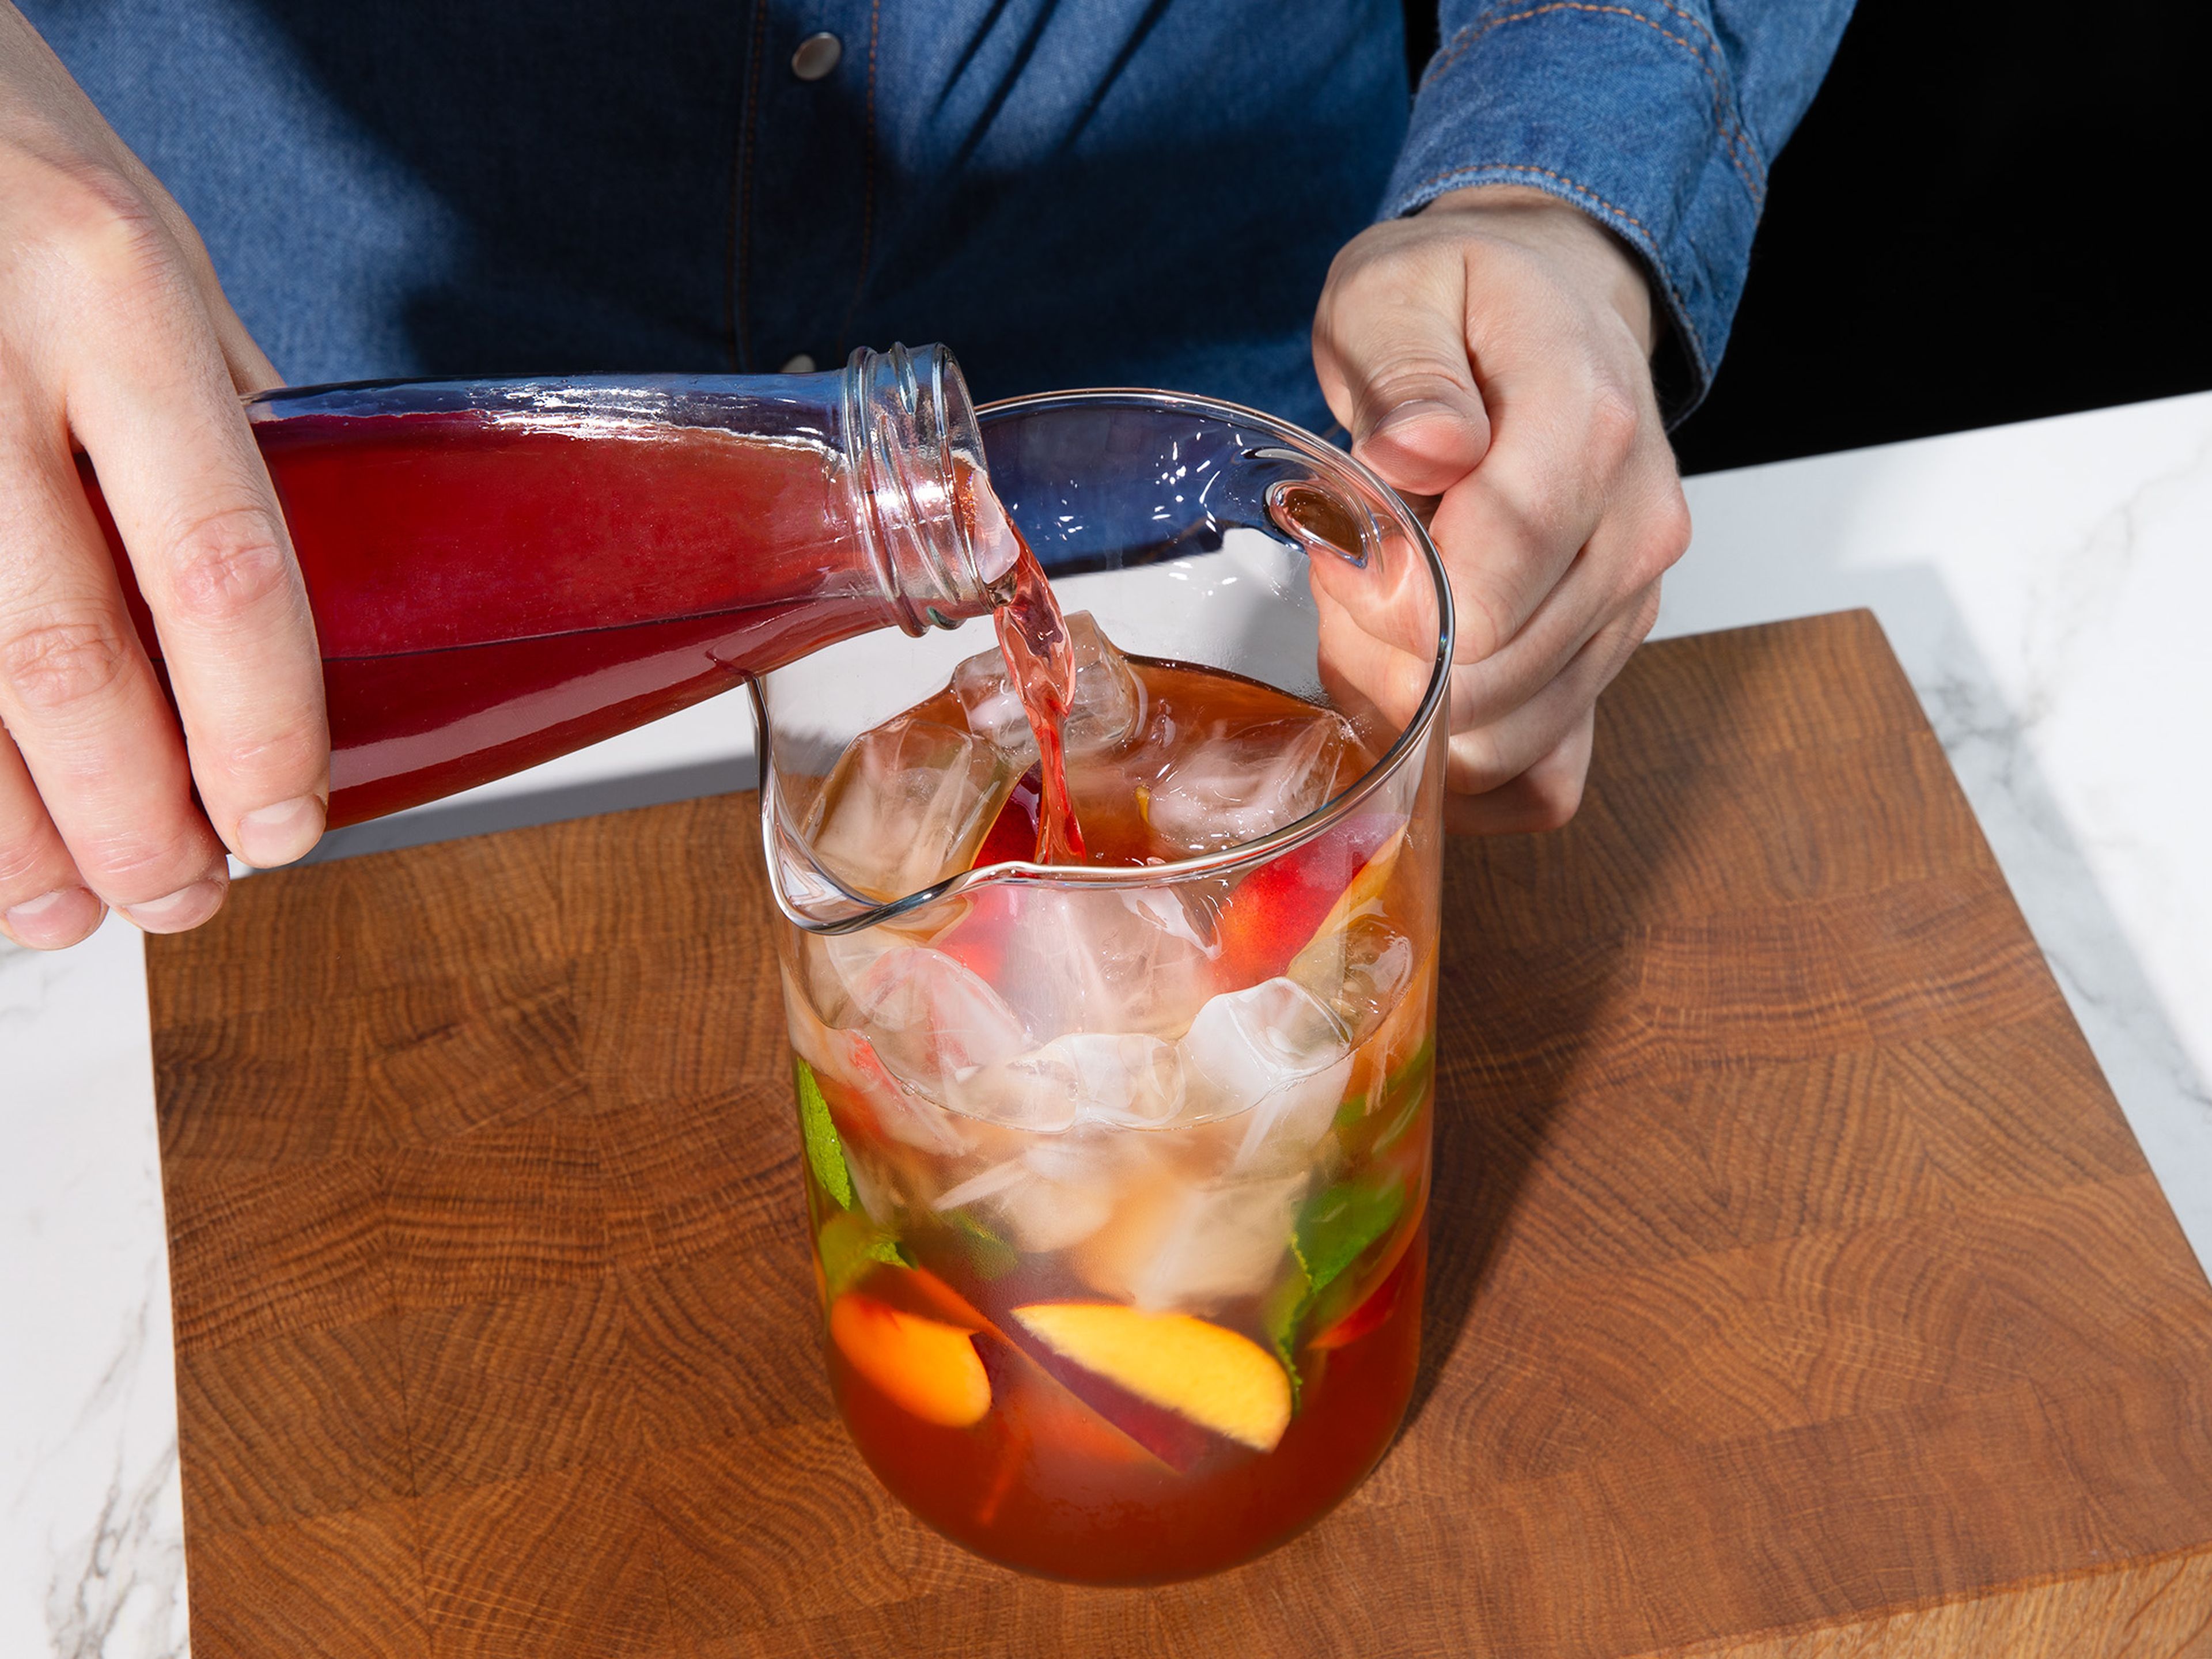 Prepare a large pitcher with ice, more mint sprigs, and remaining sliced peach. Pour in iced water, followed by the cooled tea, peach syrup, and lemon juice. Stir well. Pour into glasses and enjoy!